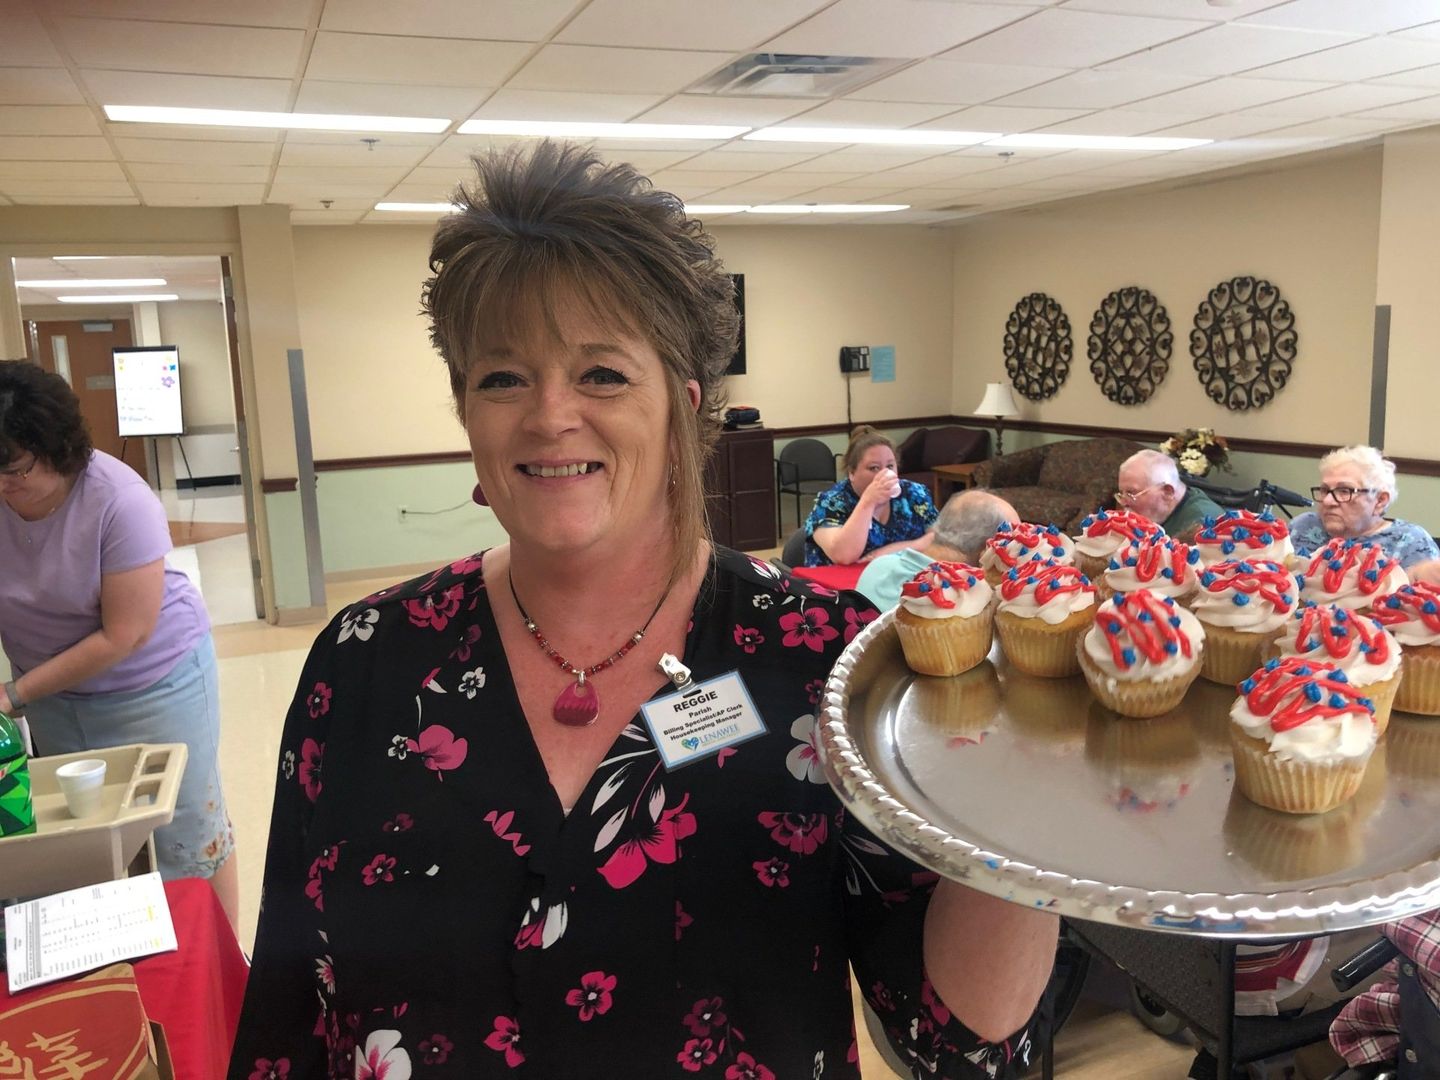 Staff member handing out Fourth of July cupcakes and Santa for Christmas at Lenawee Medical Care Facility in Adrian, MI